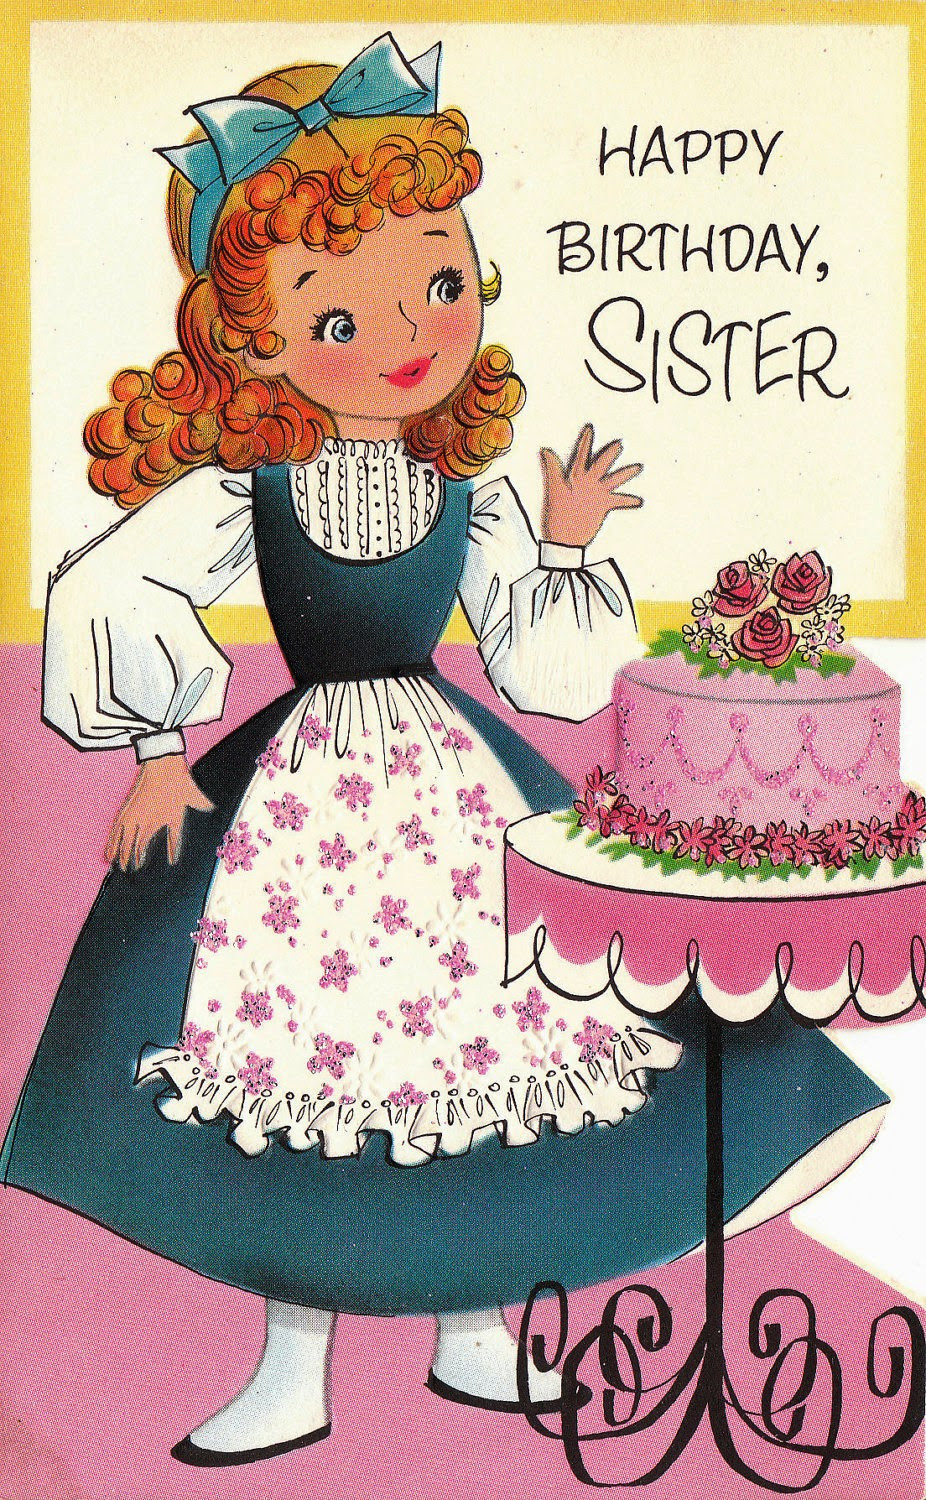 Happy Birthday Card For Sister
 Happy birthday wishes cards images for sister Greetings